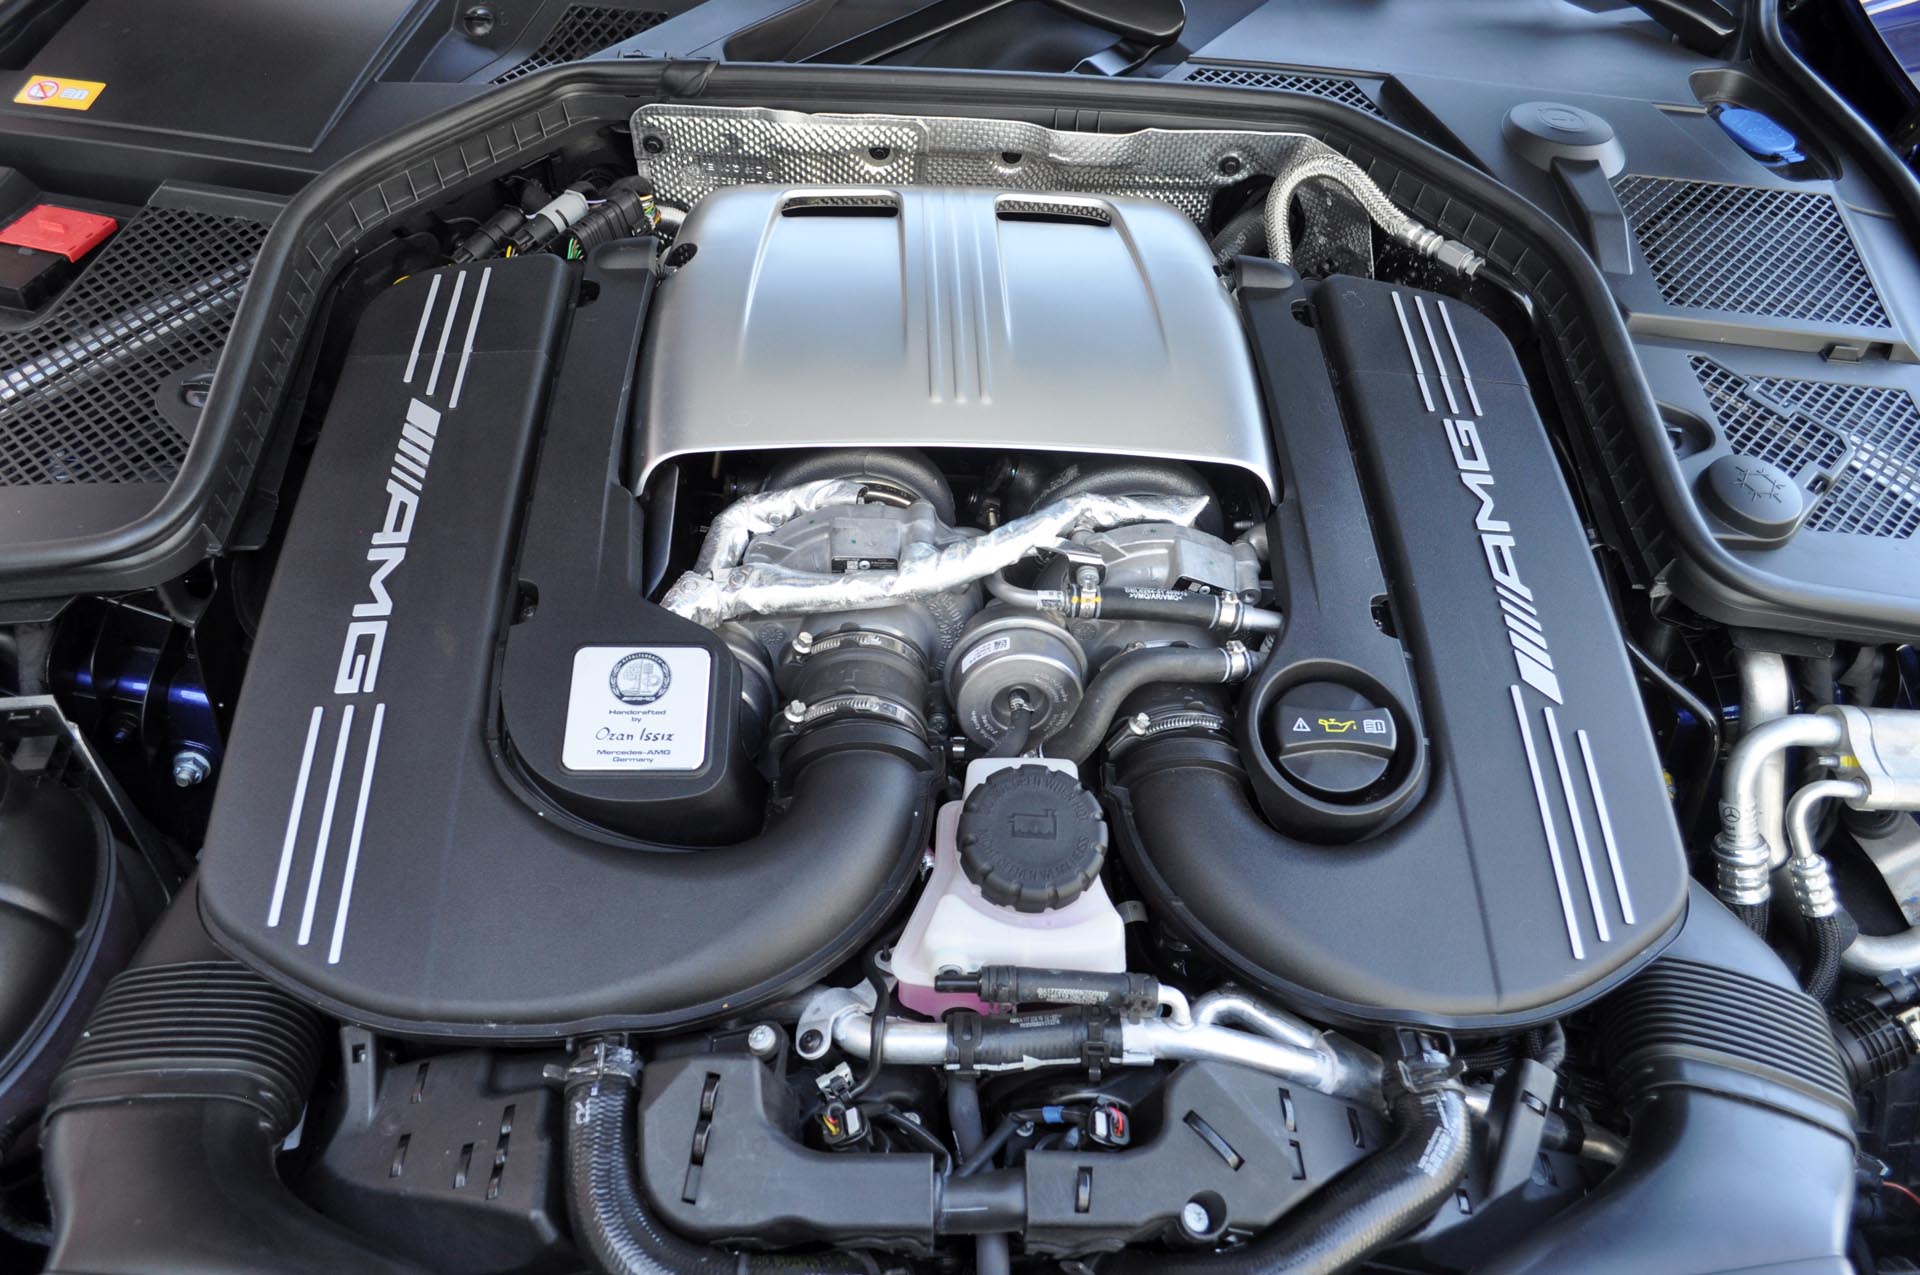 Using the same beastly 4.0L V8 found under the hood of the much pricier Mercedes-AMG GT two-seat sports car, the C 63 S pumps out 503 hp – the exact same rating as that all-new AMG GT, though the C 63 S clocks in at an even more monstrous 516 lb-ft of torque. The regular C 63 uses the same engine but slightly detuned, but still demolishes everything in its class with 469 hp and 479 lb-ft of torque.